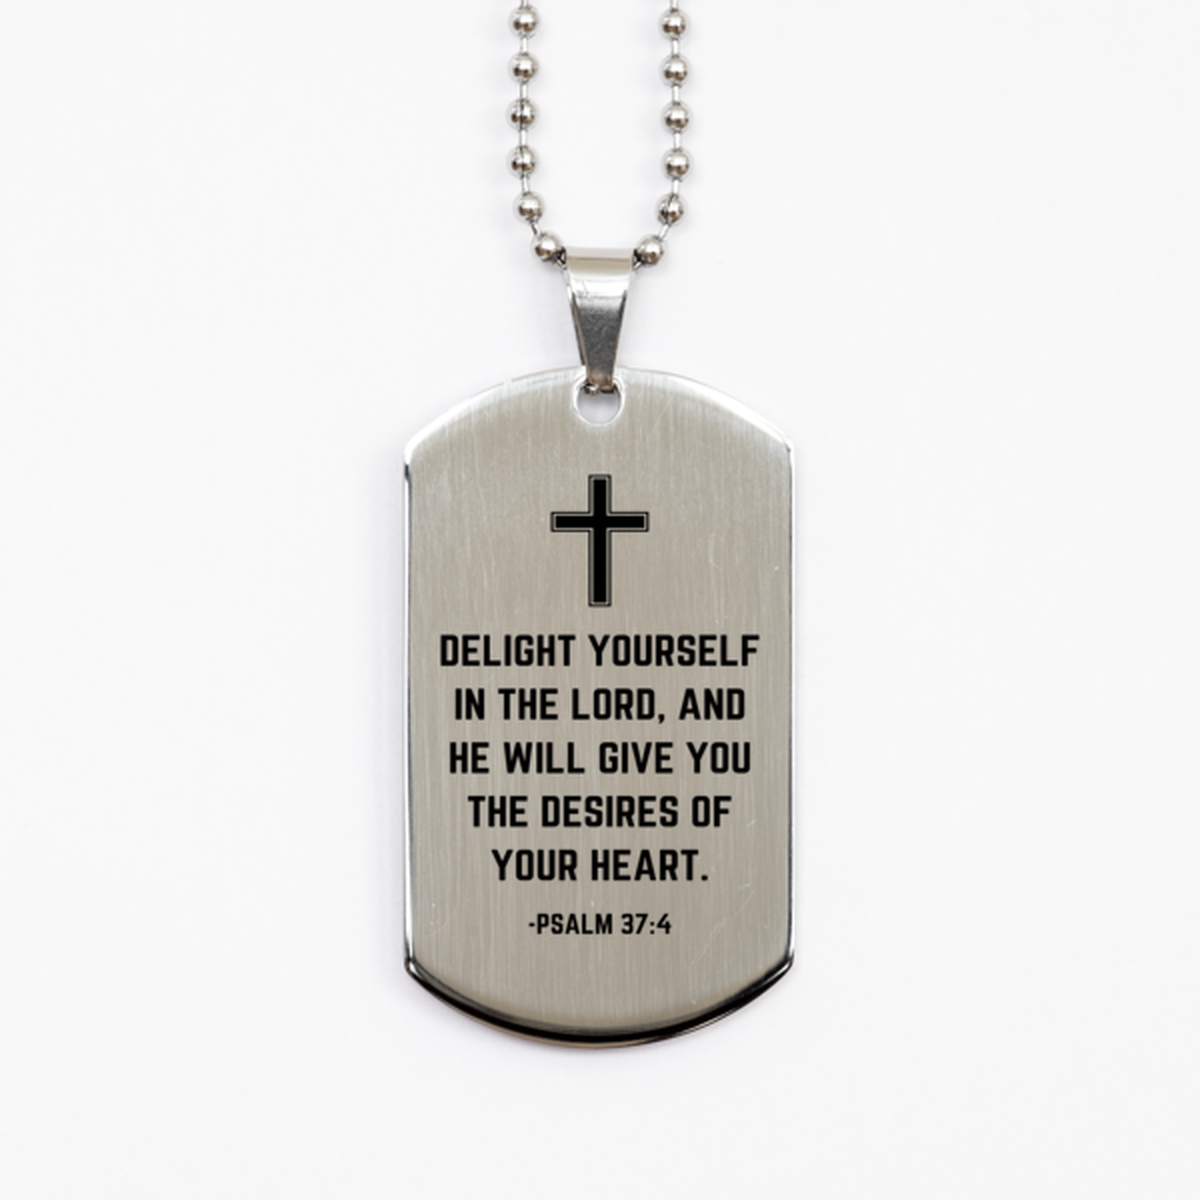 Baptism Gifts For Teenage Boys Girls, Christian Bible Verse Silver Dog Tag, Delight yourself in the Lord, Confirmation Gifts, Bible Verse Necklace for Son, Godson, Grandson, Nephew